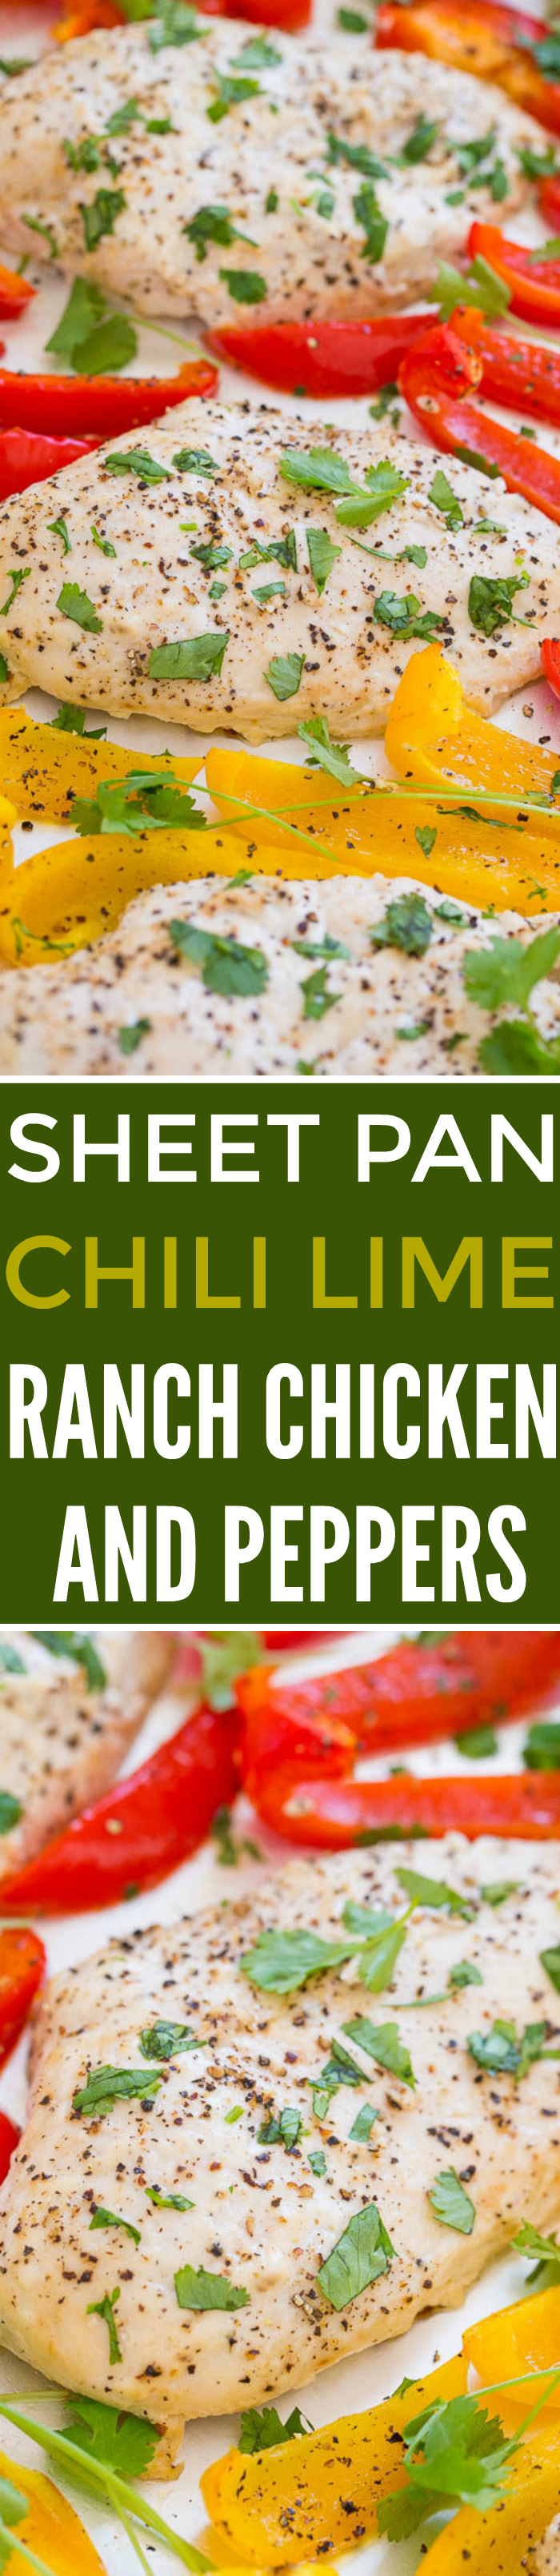 A two picture collage of sheet pan chili lime ranch chicken and peppers with graphic title